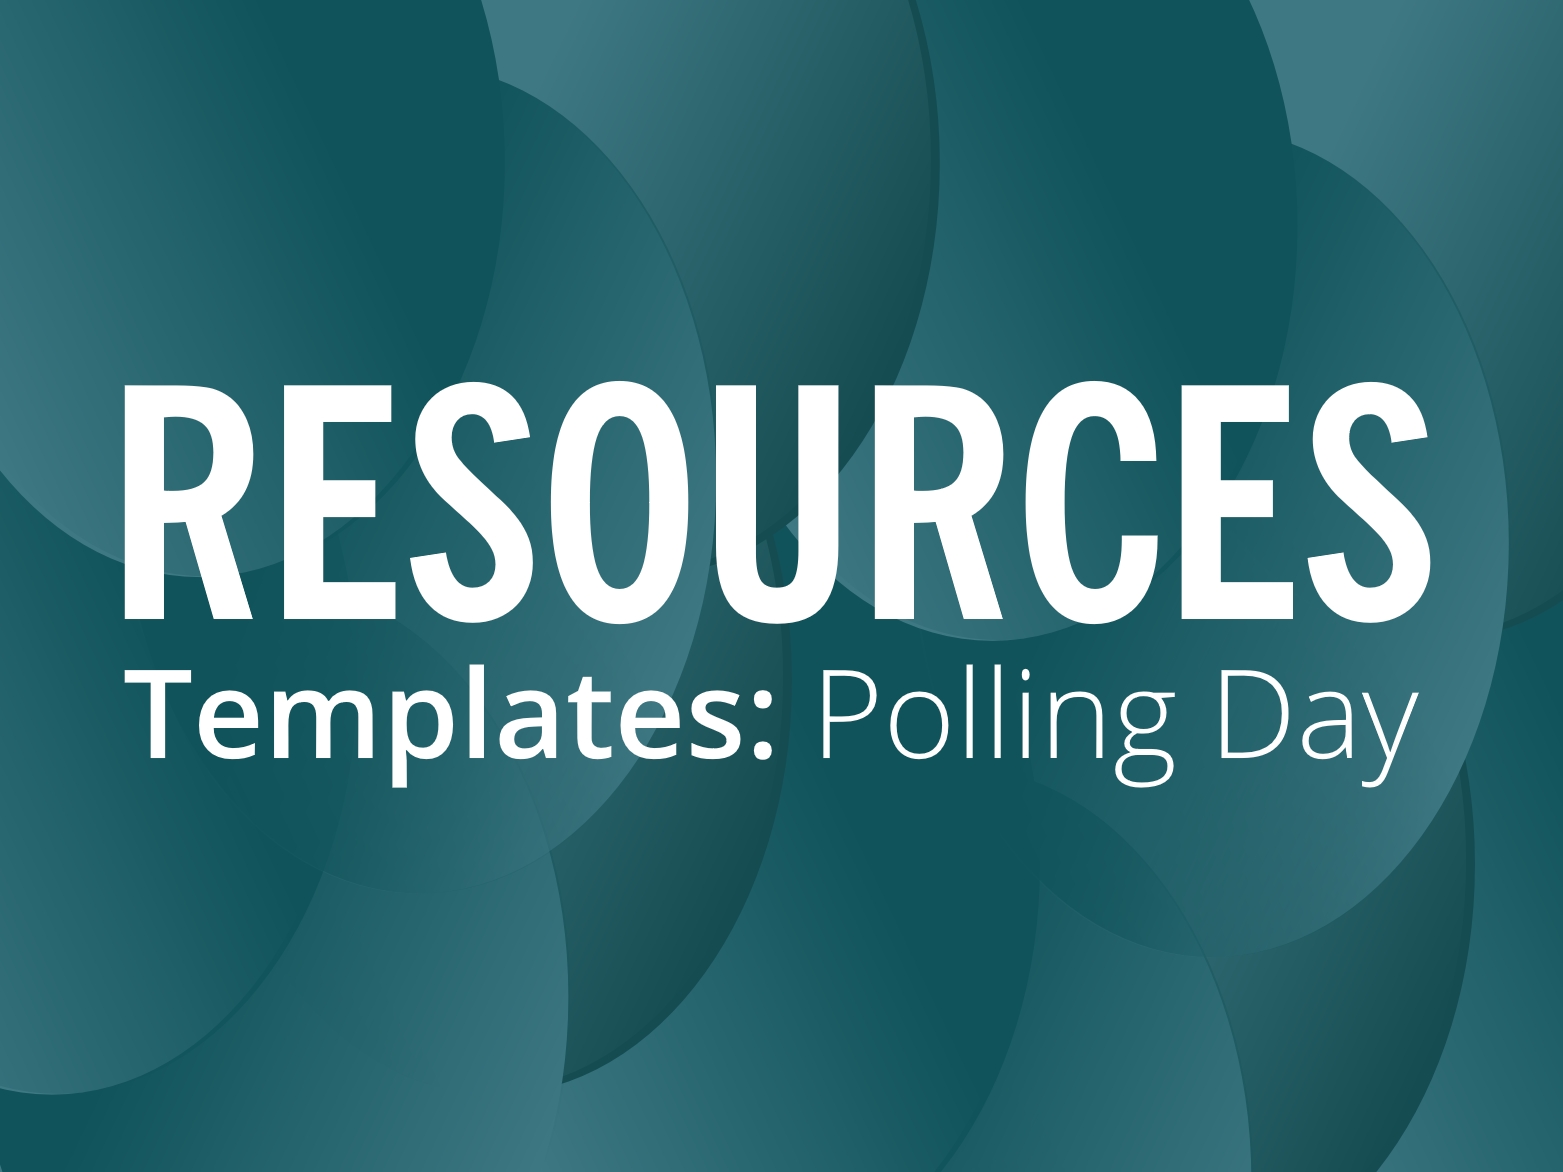 Election templates: Polling Day